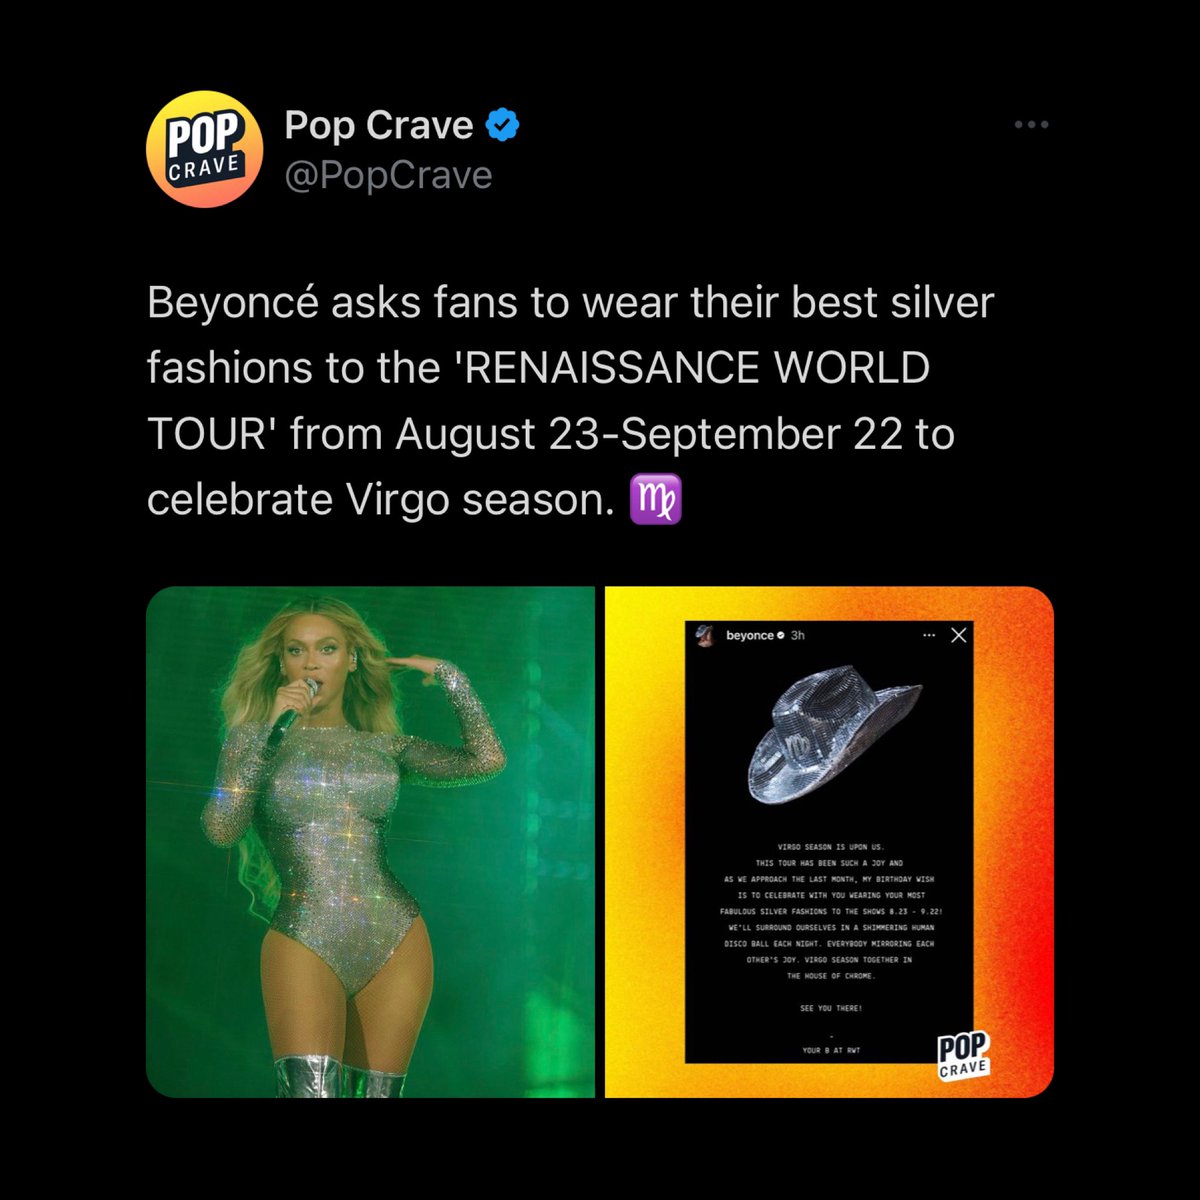 Etsy businesses are seeing a sales boom following Beyoncé’s request for fans to wear silver fashions to the 'RENAISSANCE WORLD TOUR' throughout Virgo season, TMZ reports. Seller Sequin Fans says they’ve seen a 200% sales increase in silver apparel and a 400% bump in overall…